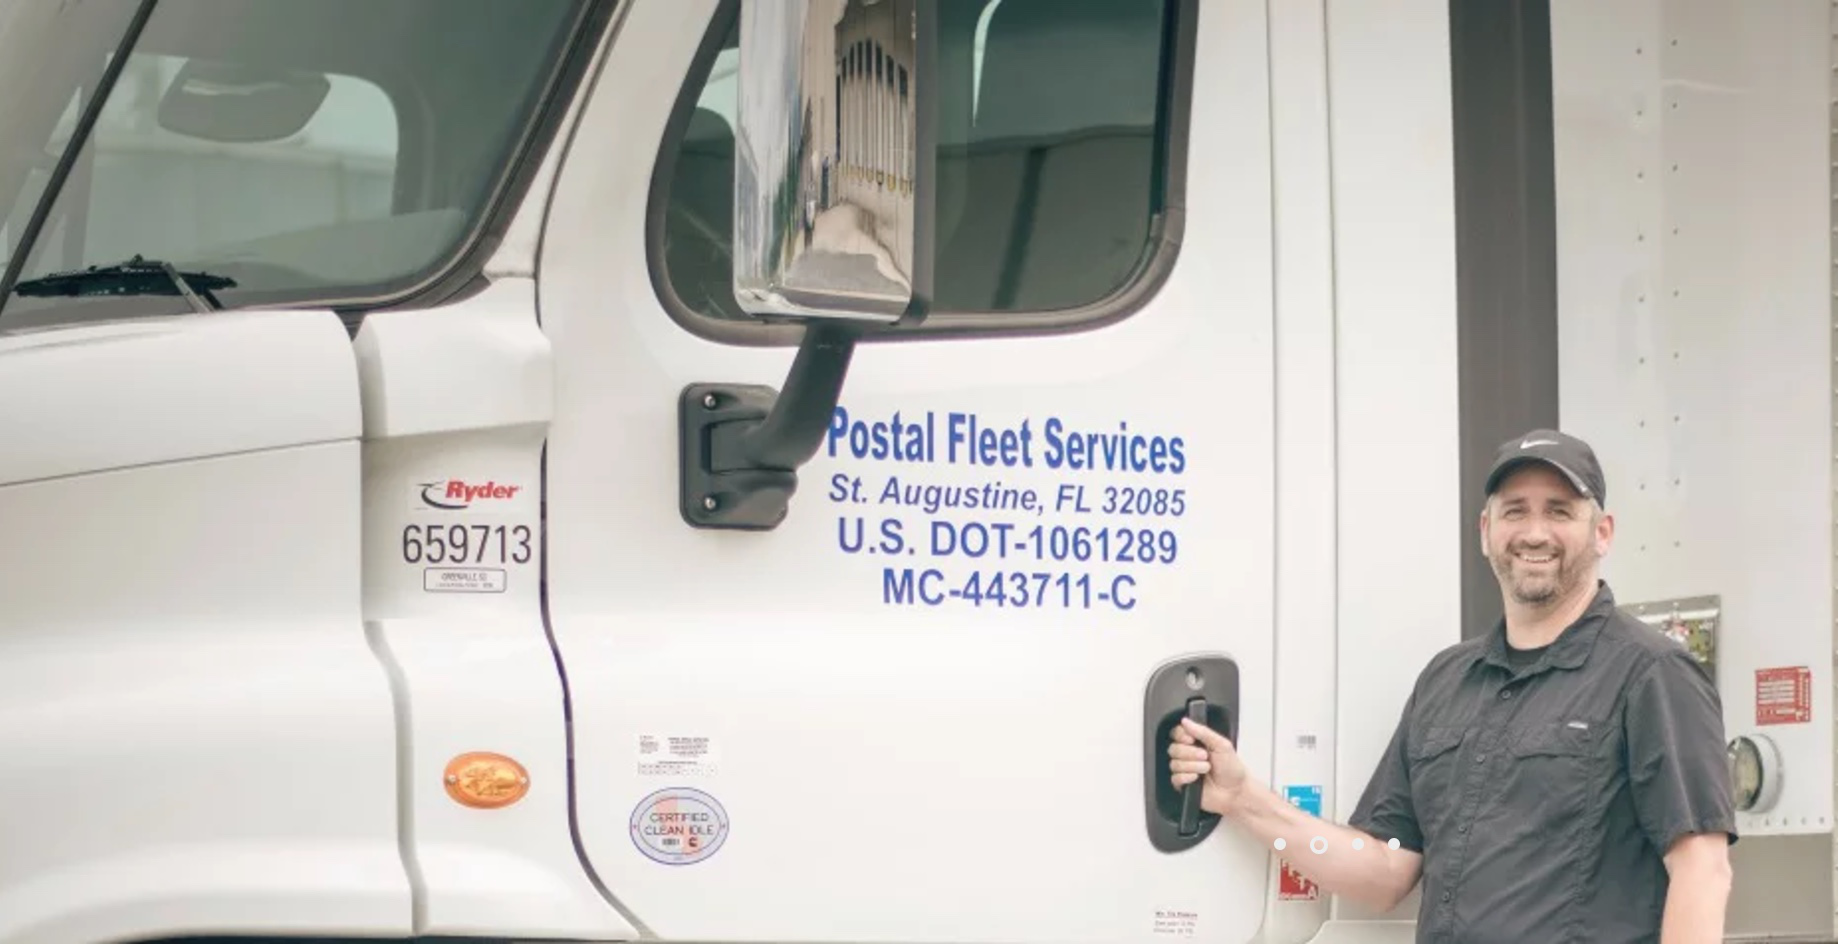 Postal Fleet Services truck and driver